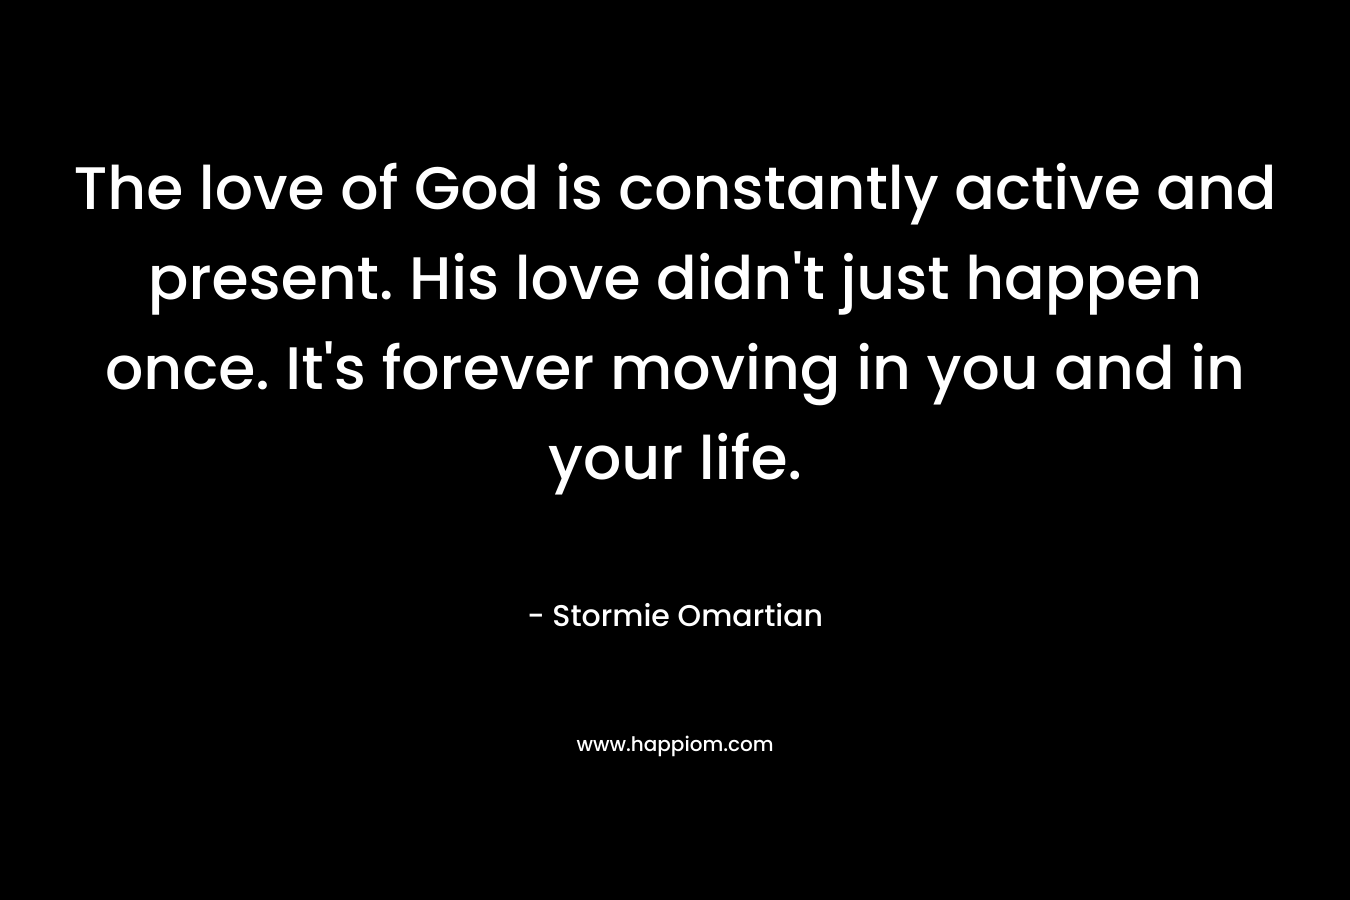 The love of God is constantly active and present. His love didn’t just happen once. It’s forever moving in you and in your life. – Stormie Omartian